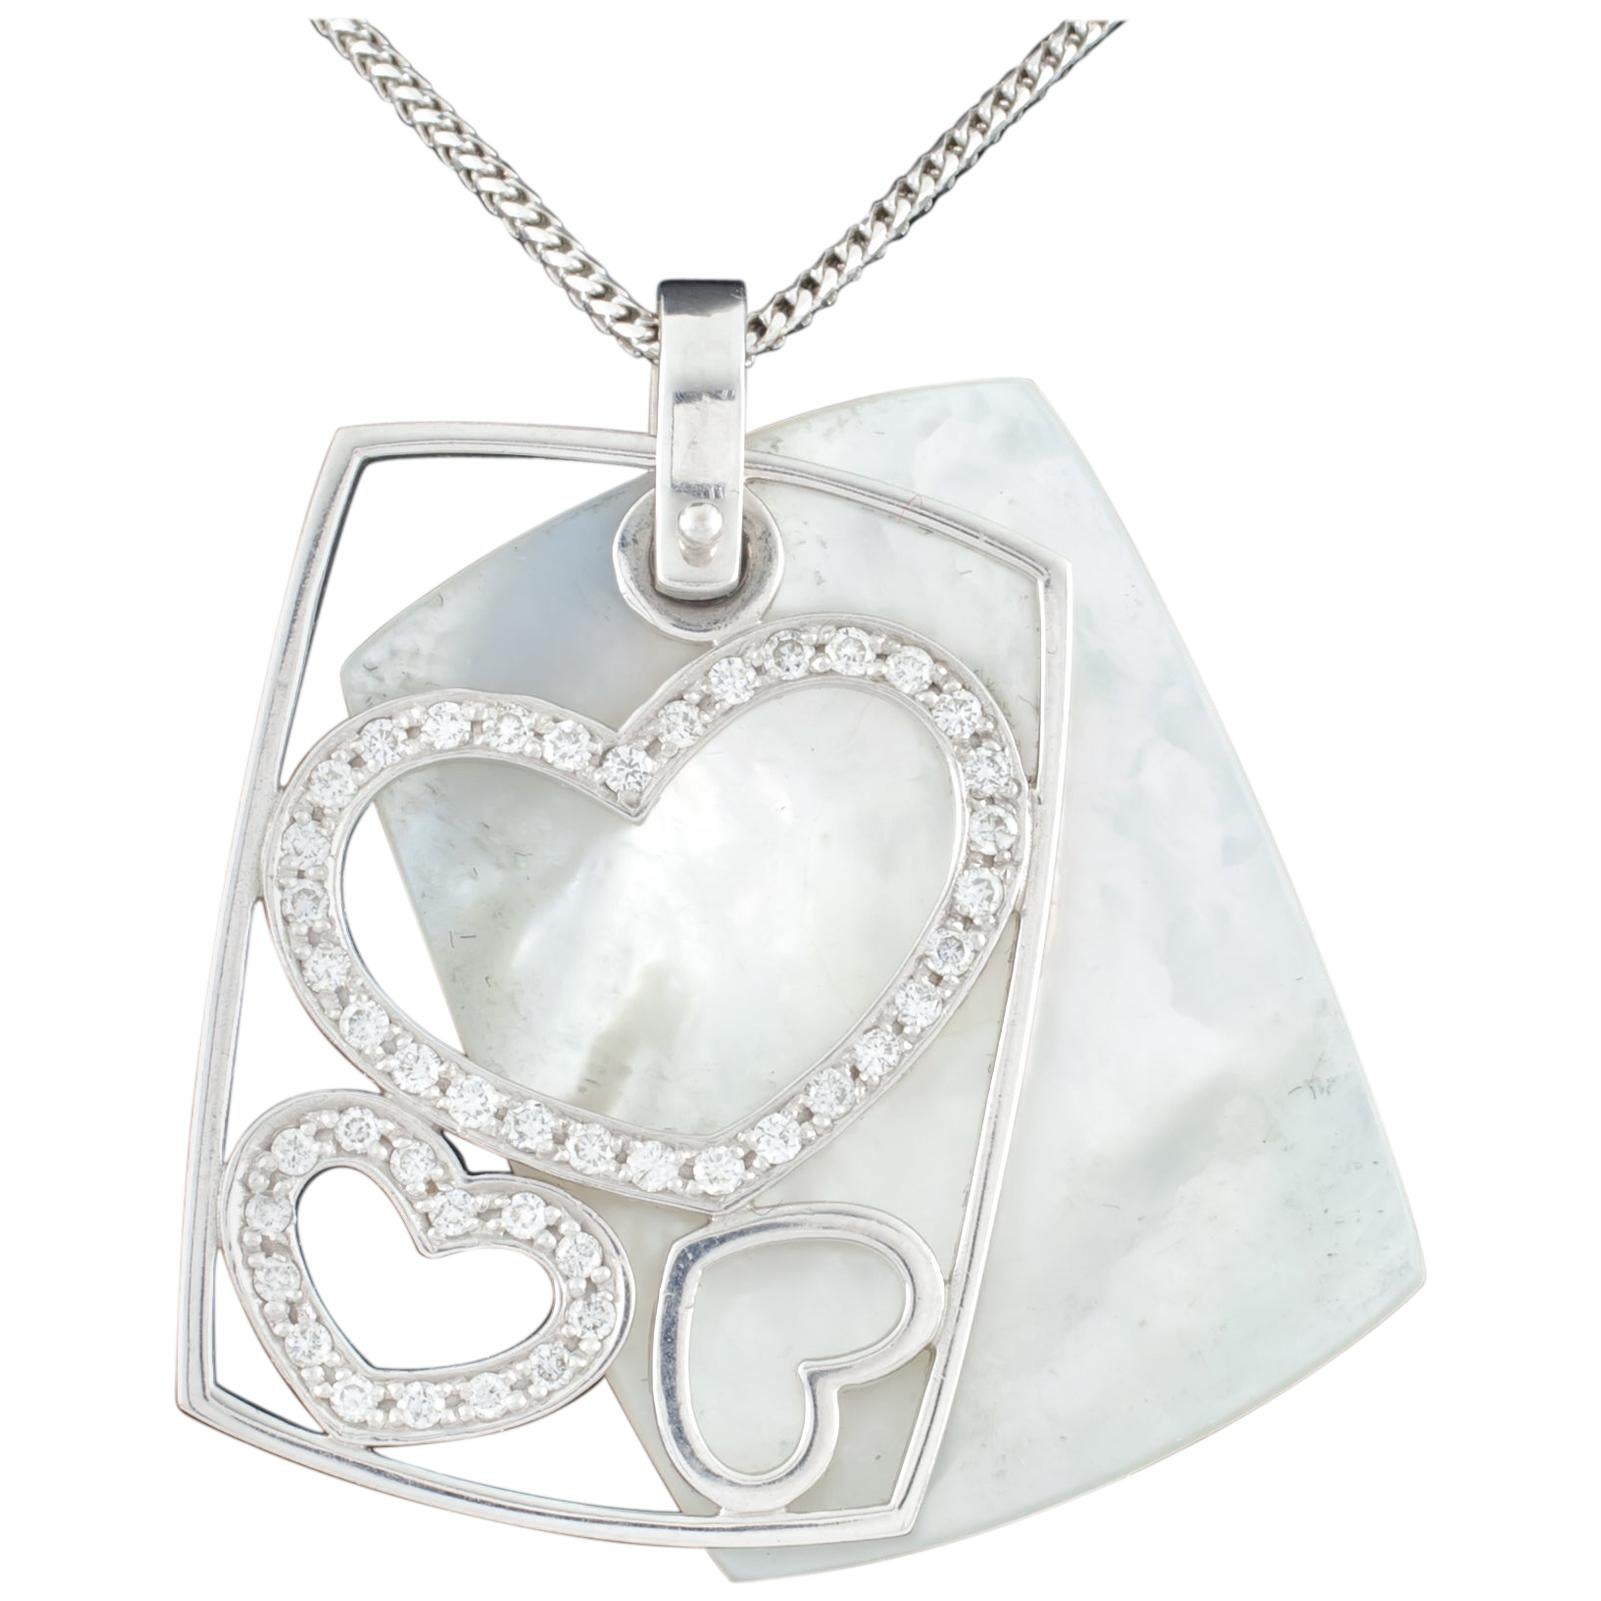 Mother of Pearl and Diamond Heart Pendant Set in 14 Karat White Gold with Chain